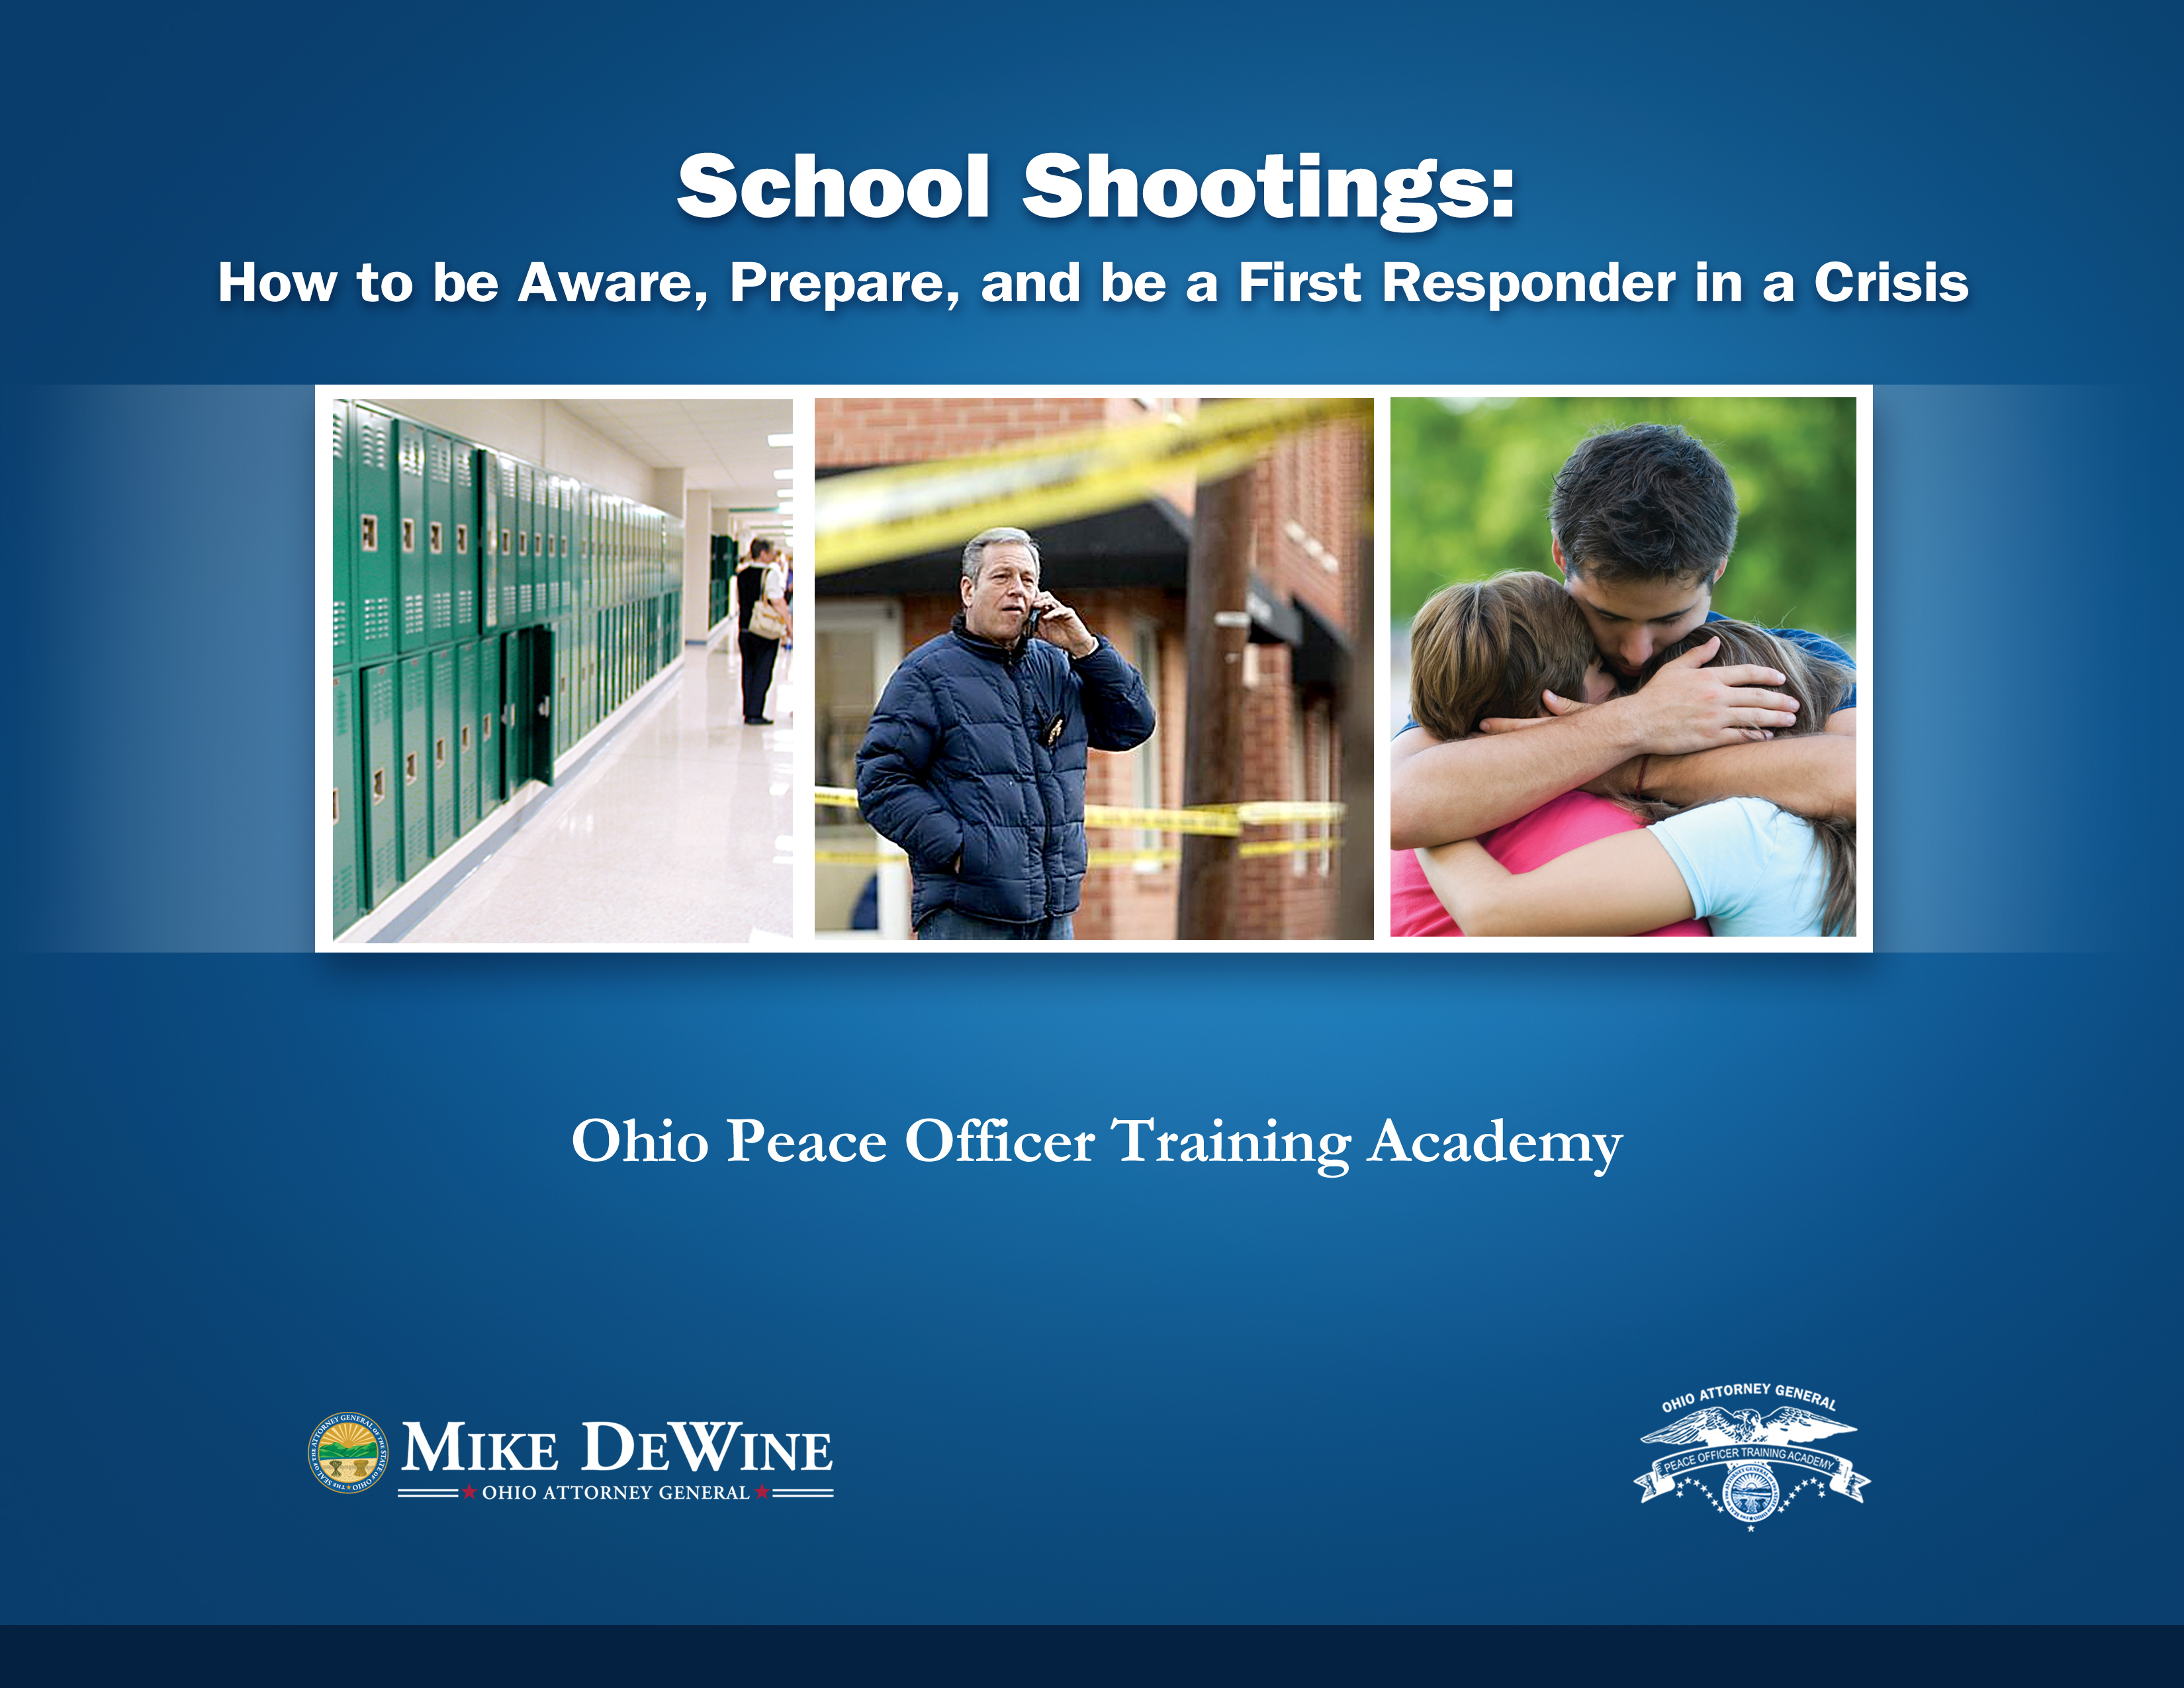 School Shootings: How to be Aware, Prepare, and be a First Responder in a Crisis: Ohio Attorney General Mike DeWine